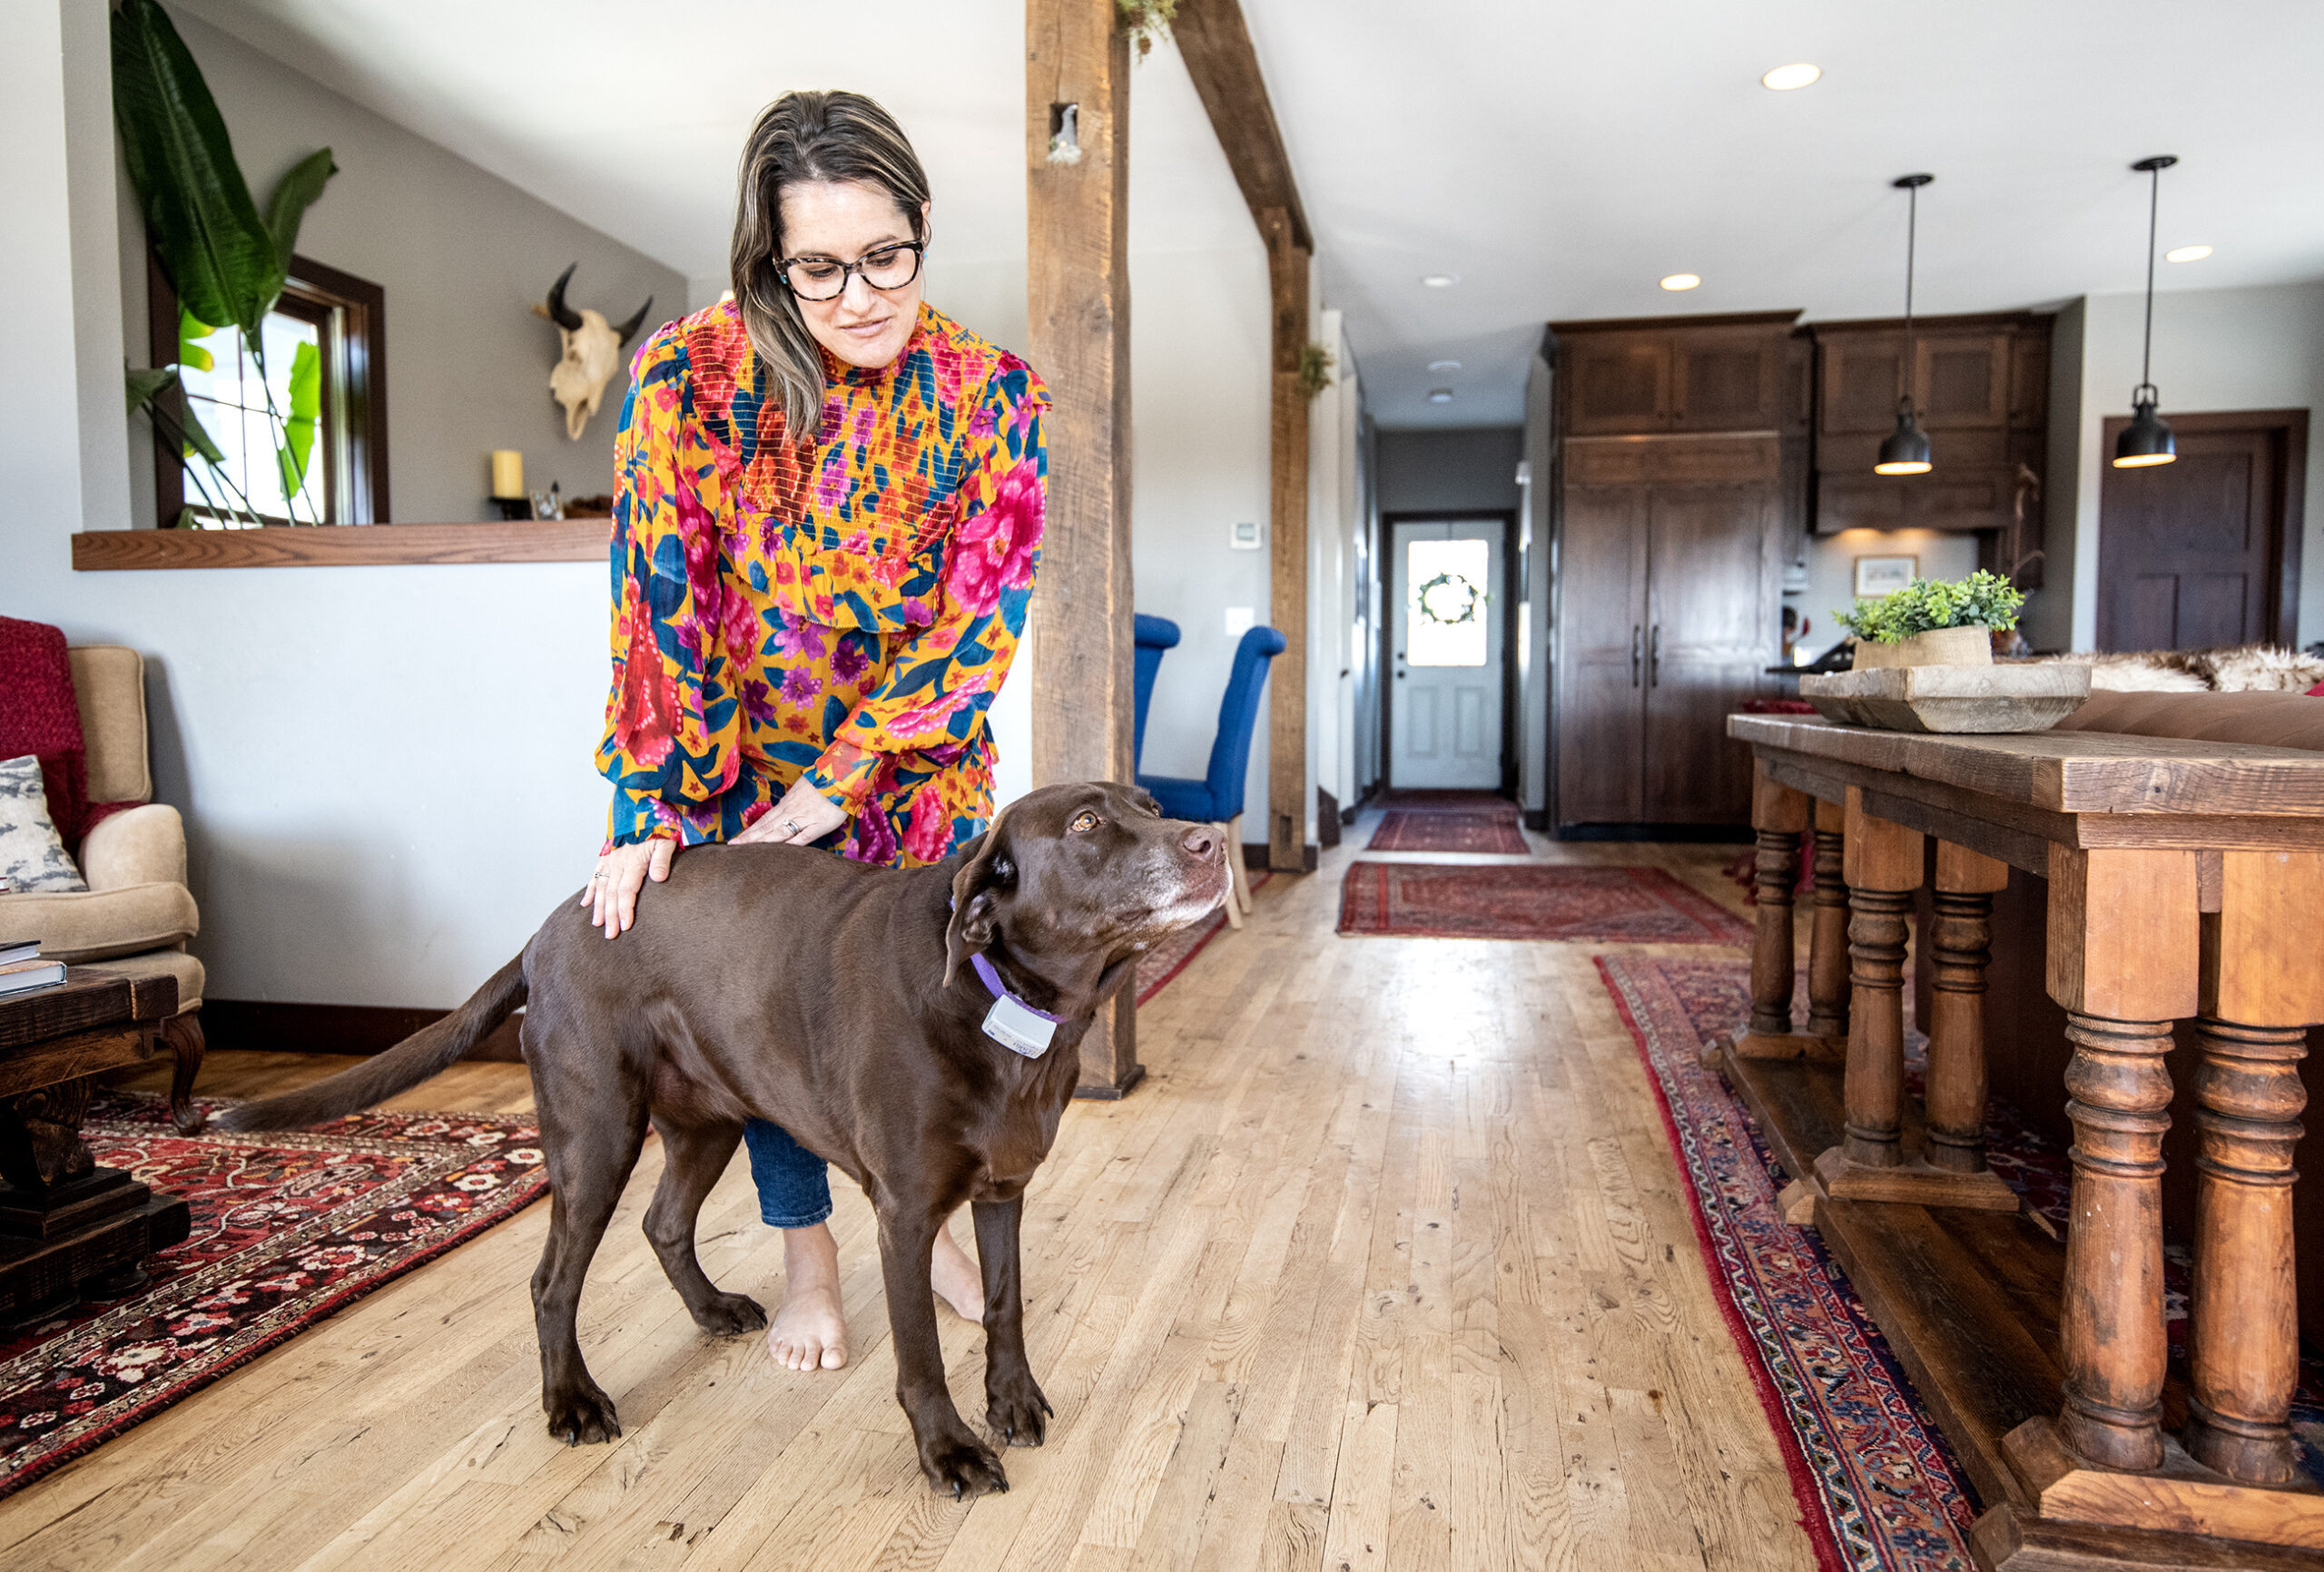 A woman stands in her home and leans down to pet her brown dog.